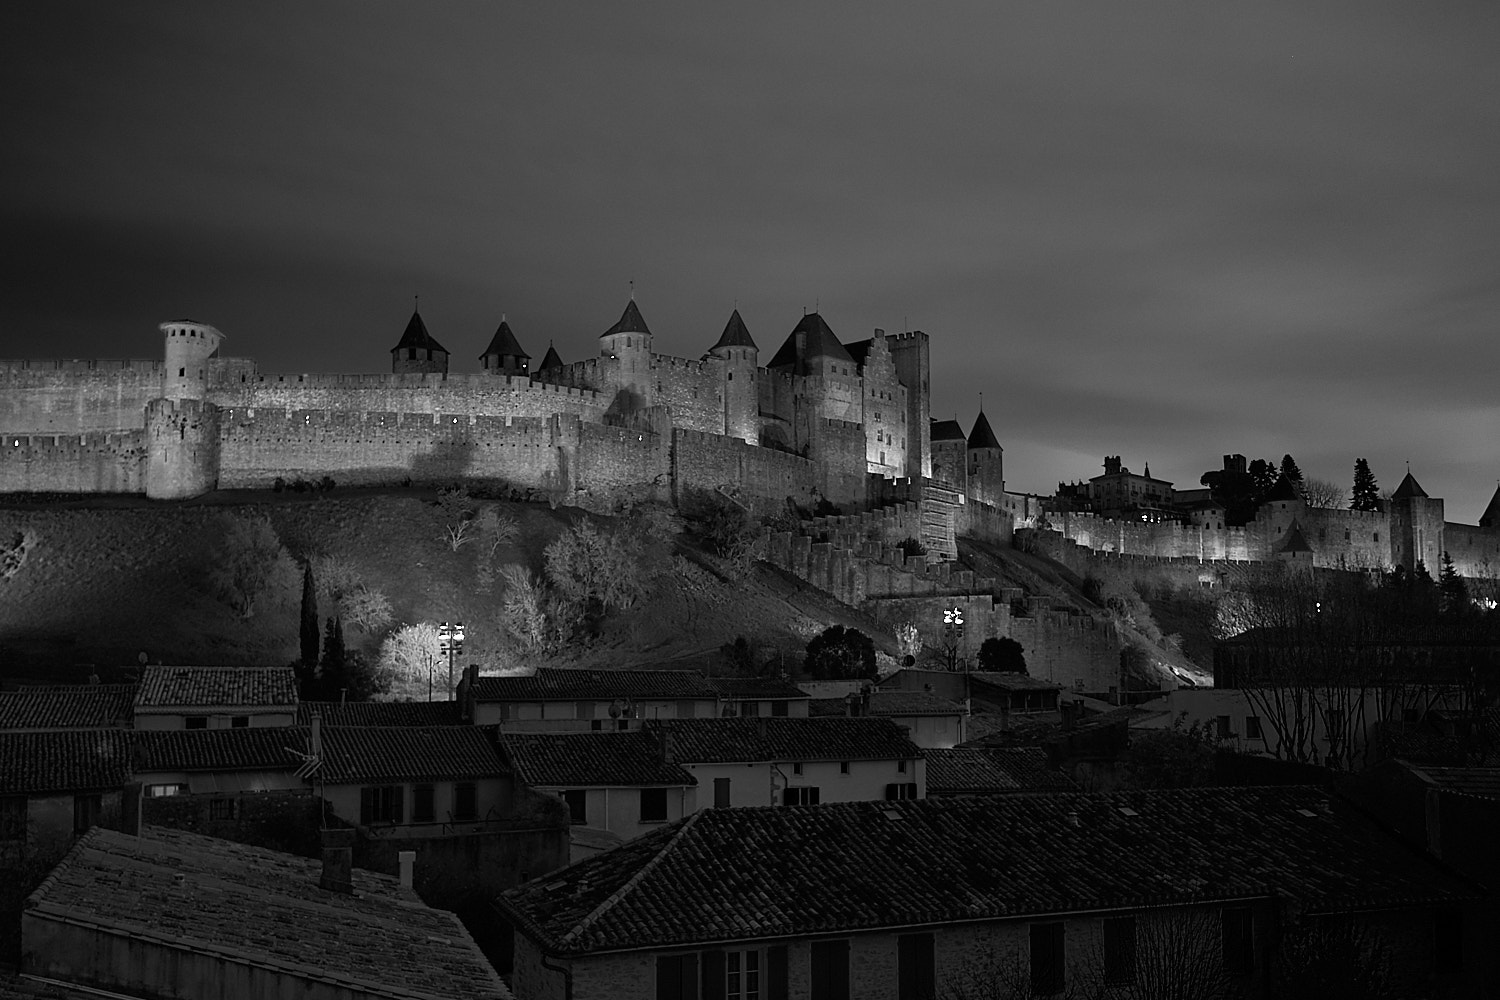 Night view of the fortress city of Carcassone in south France